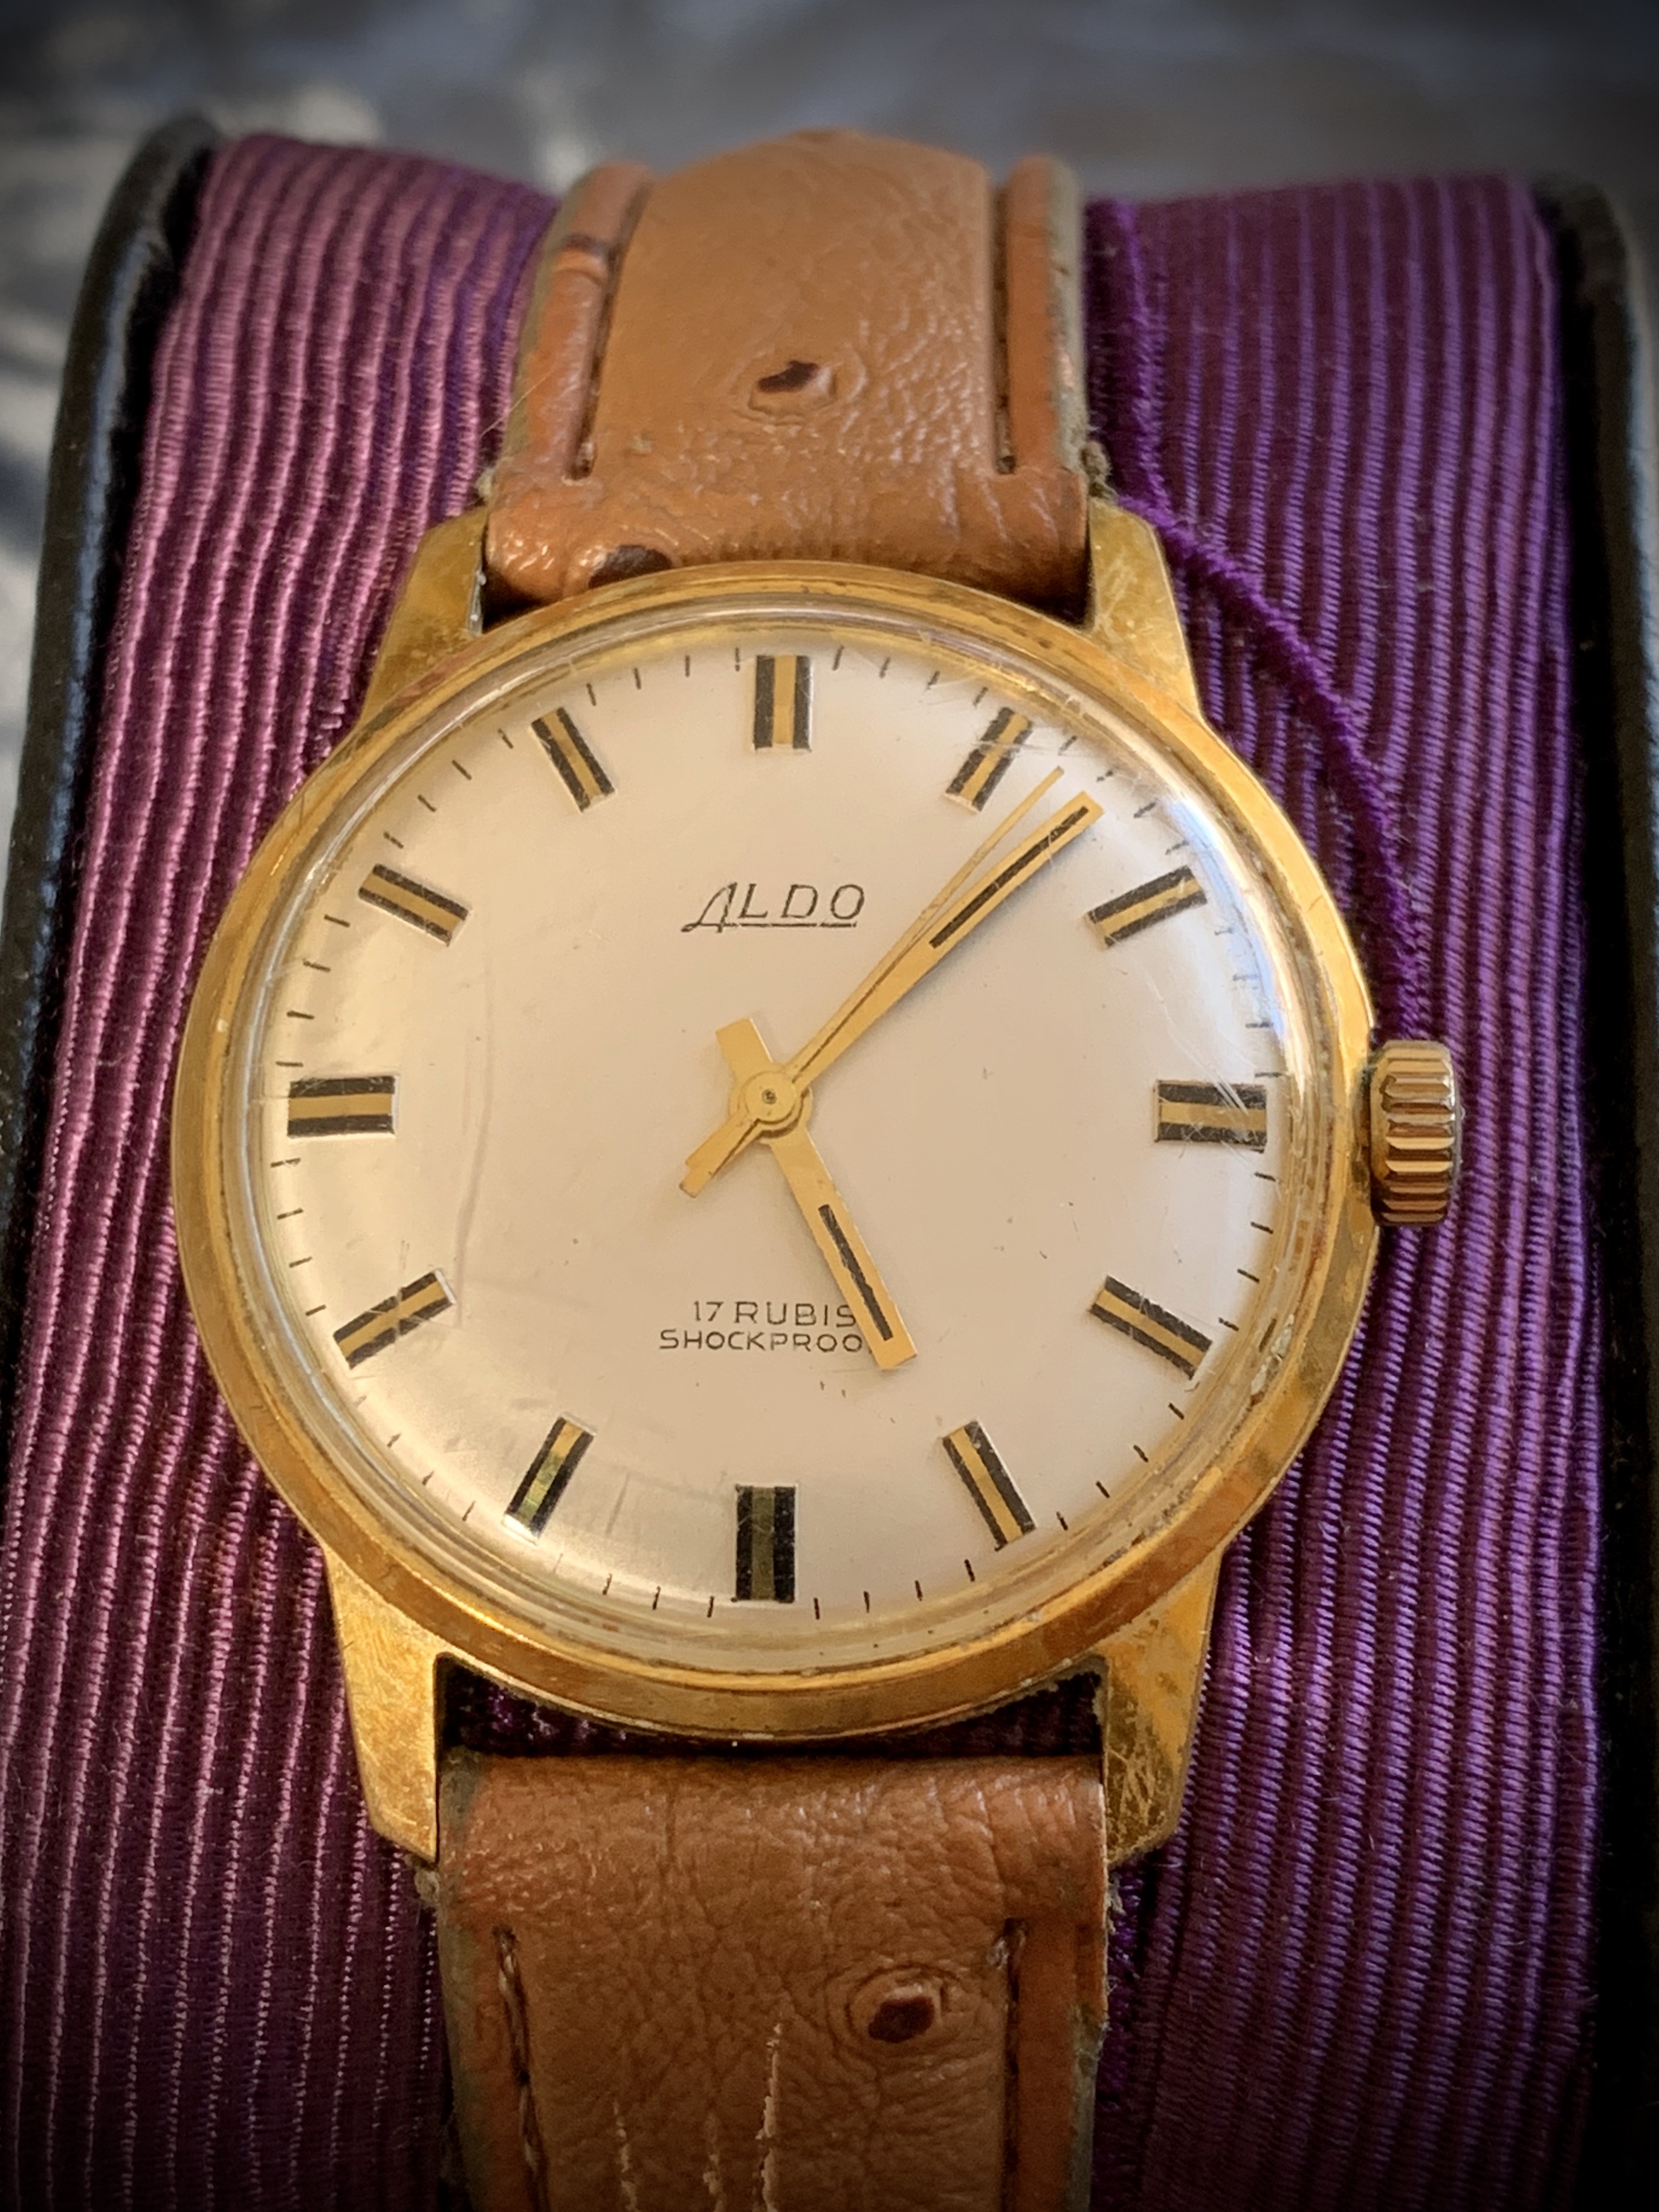 martyn ware on Twitter: "Last of my for sale ALDO German mens watch 1970s Reserve £60 inc UK postage (others on request) Working - 90 days DM me https://t.co/Y31GOyPIAA"